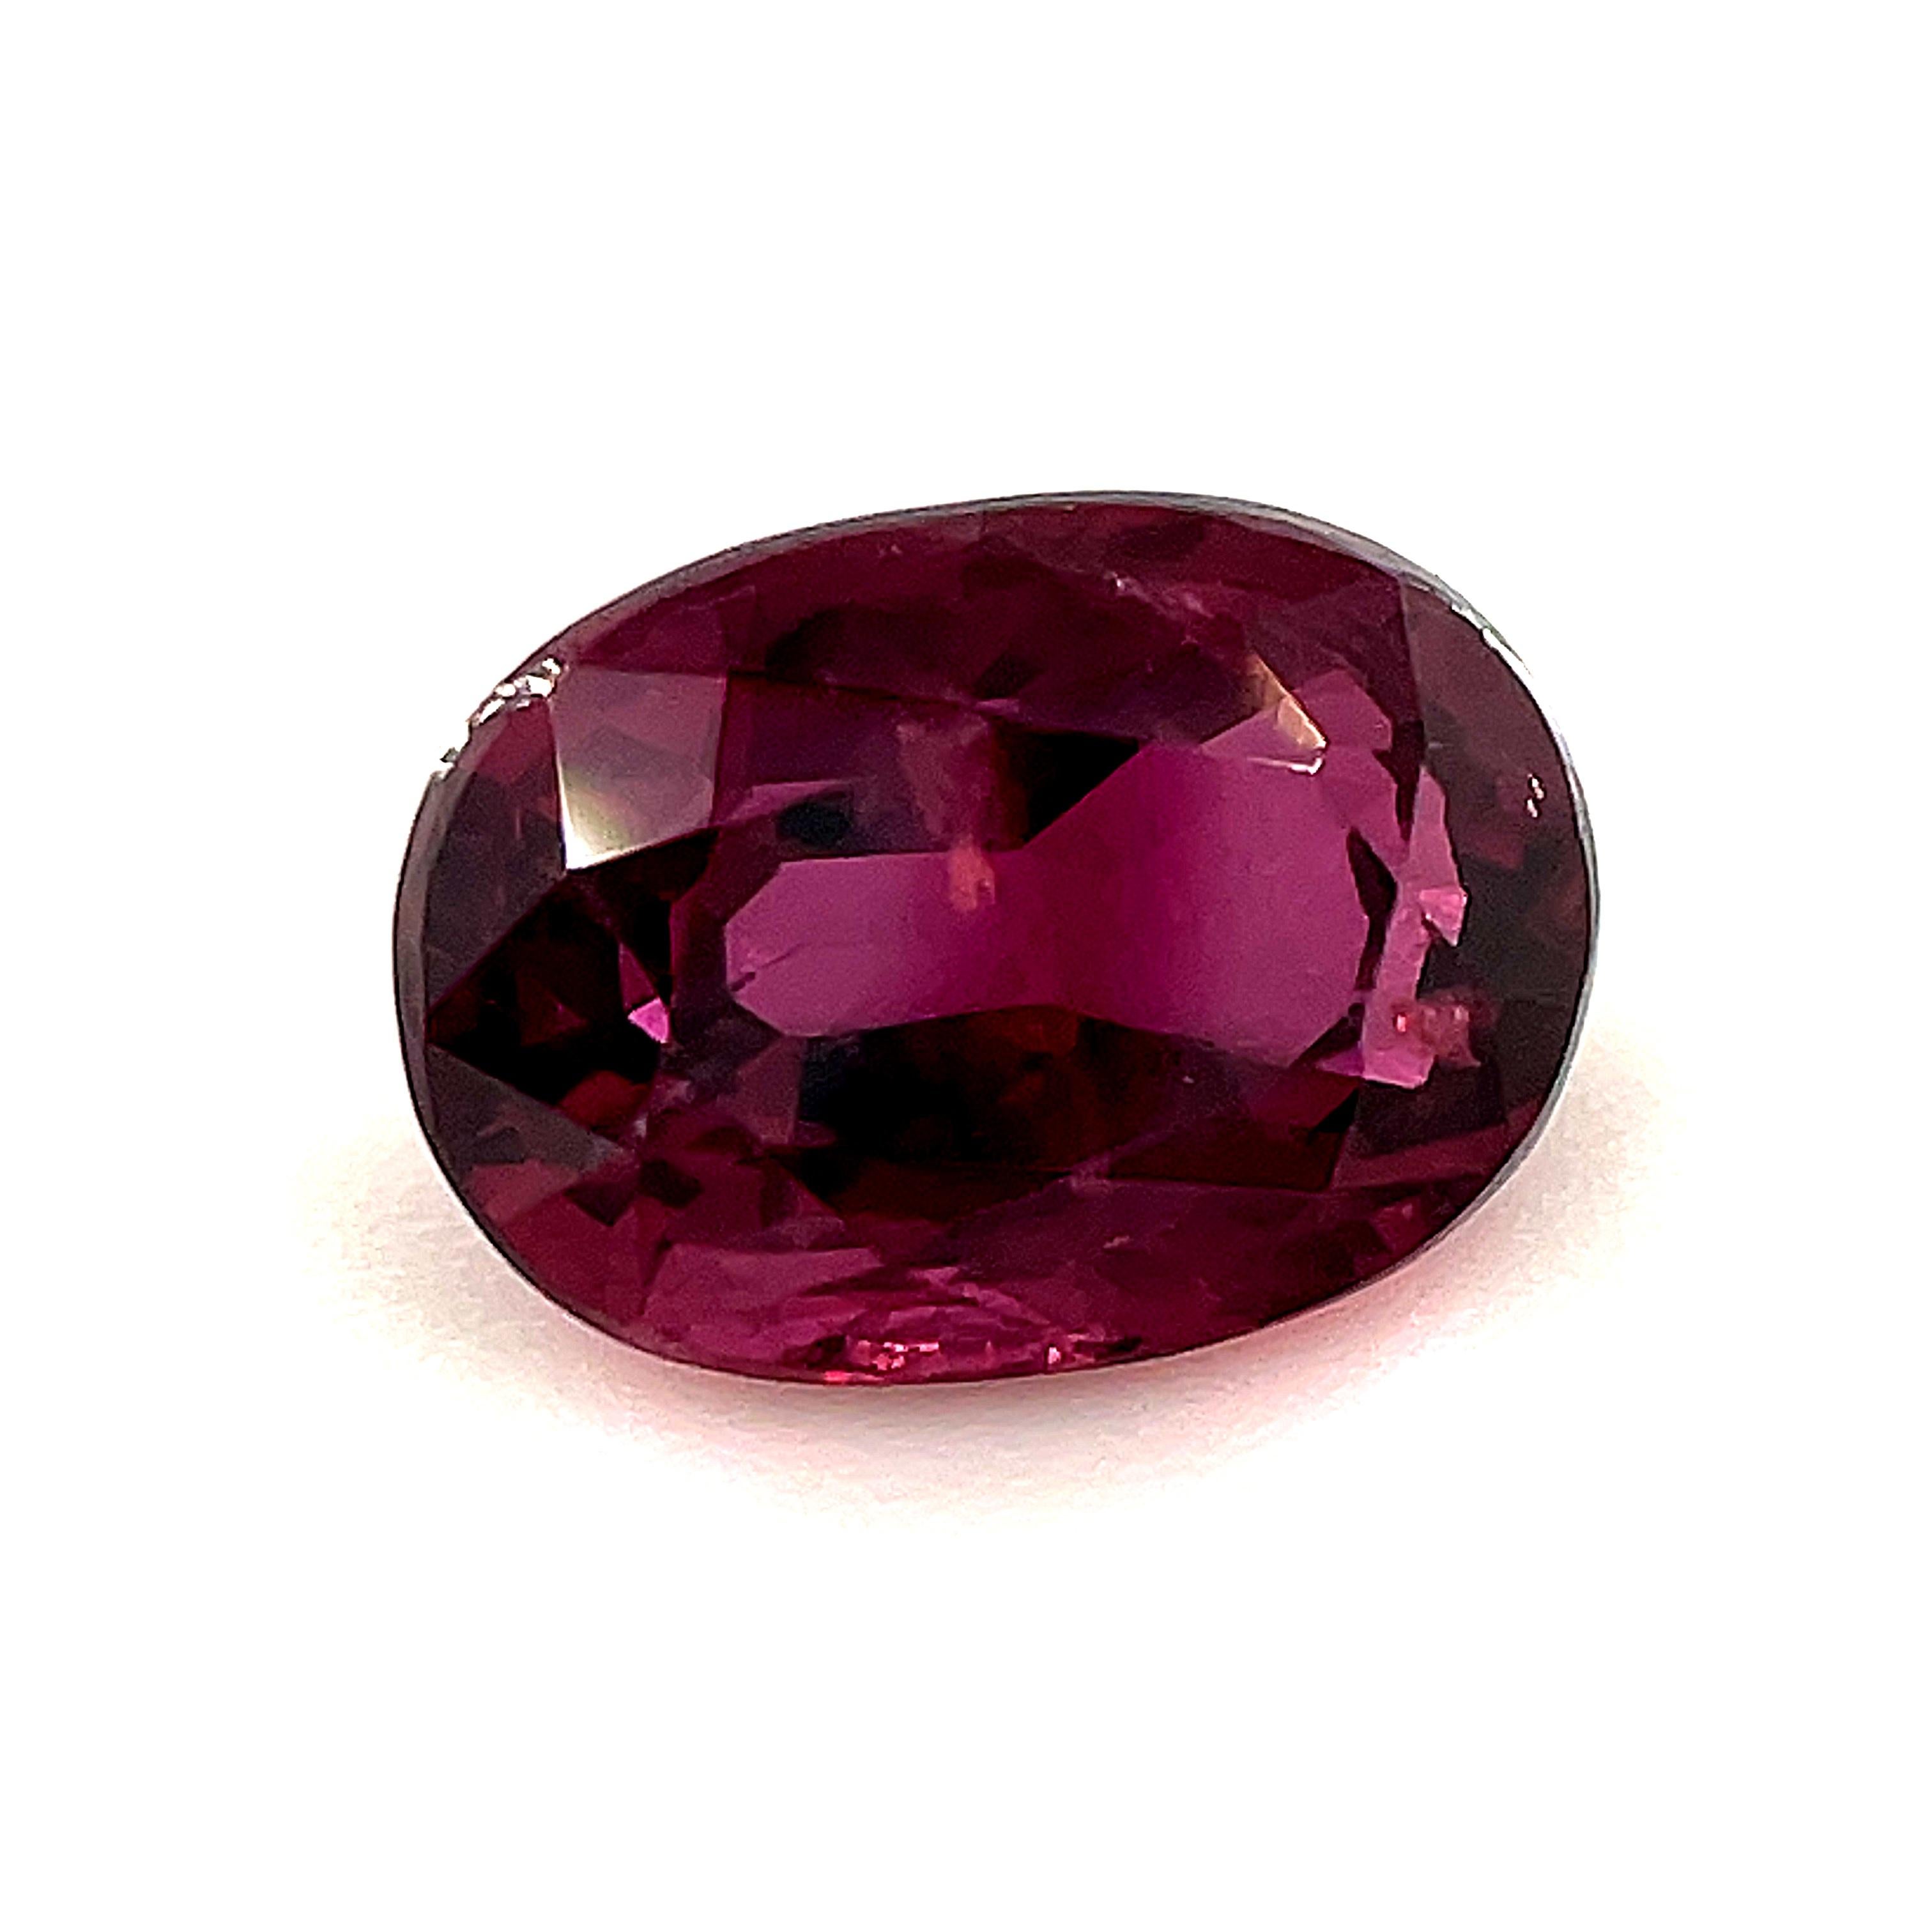 This pretty ruby has a rich red color and is the perfect size for a classic 3-stone ring! Weighing 1.24 carat, it measures 6.81 x 4.85 millimeters and has beautiful proportions. The deep red color is exactly the hue that people envision when they